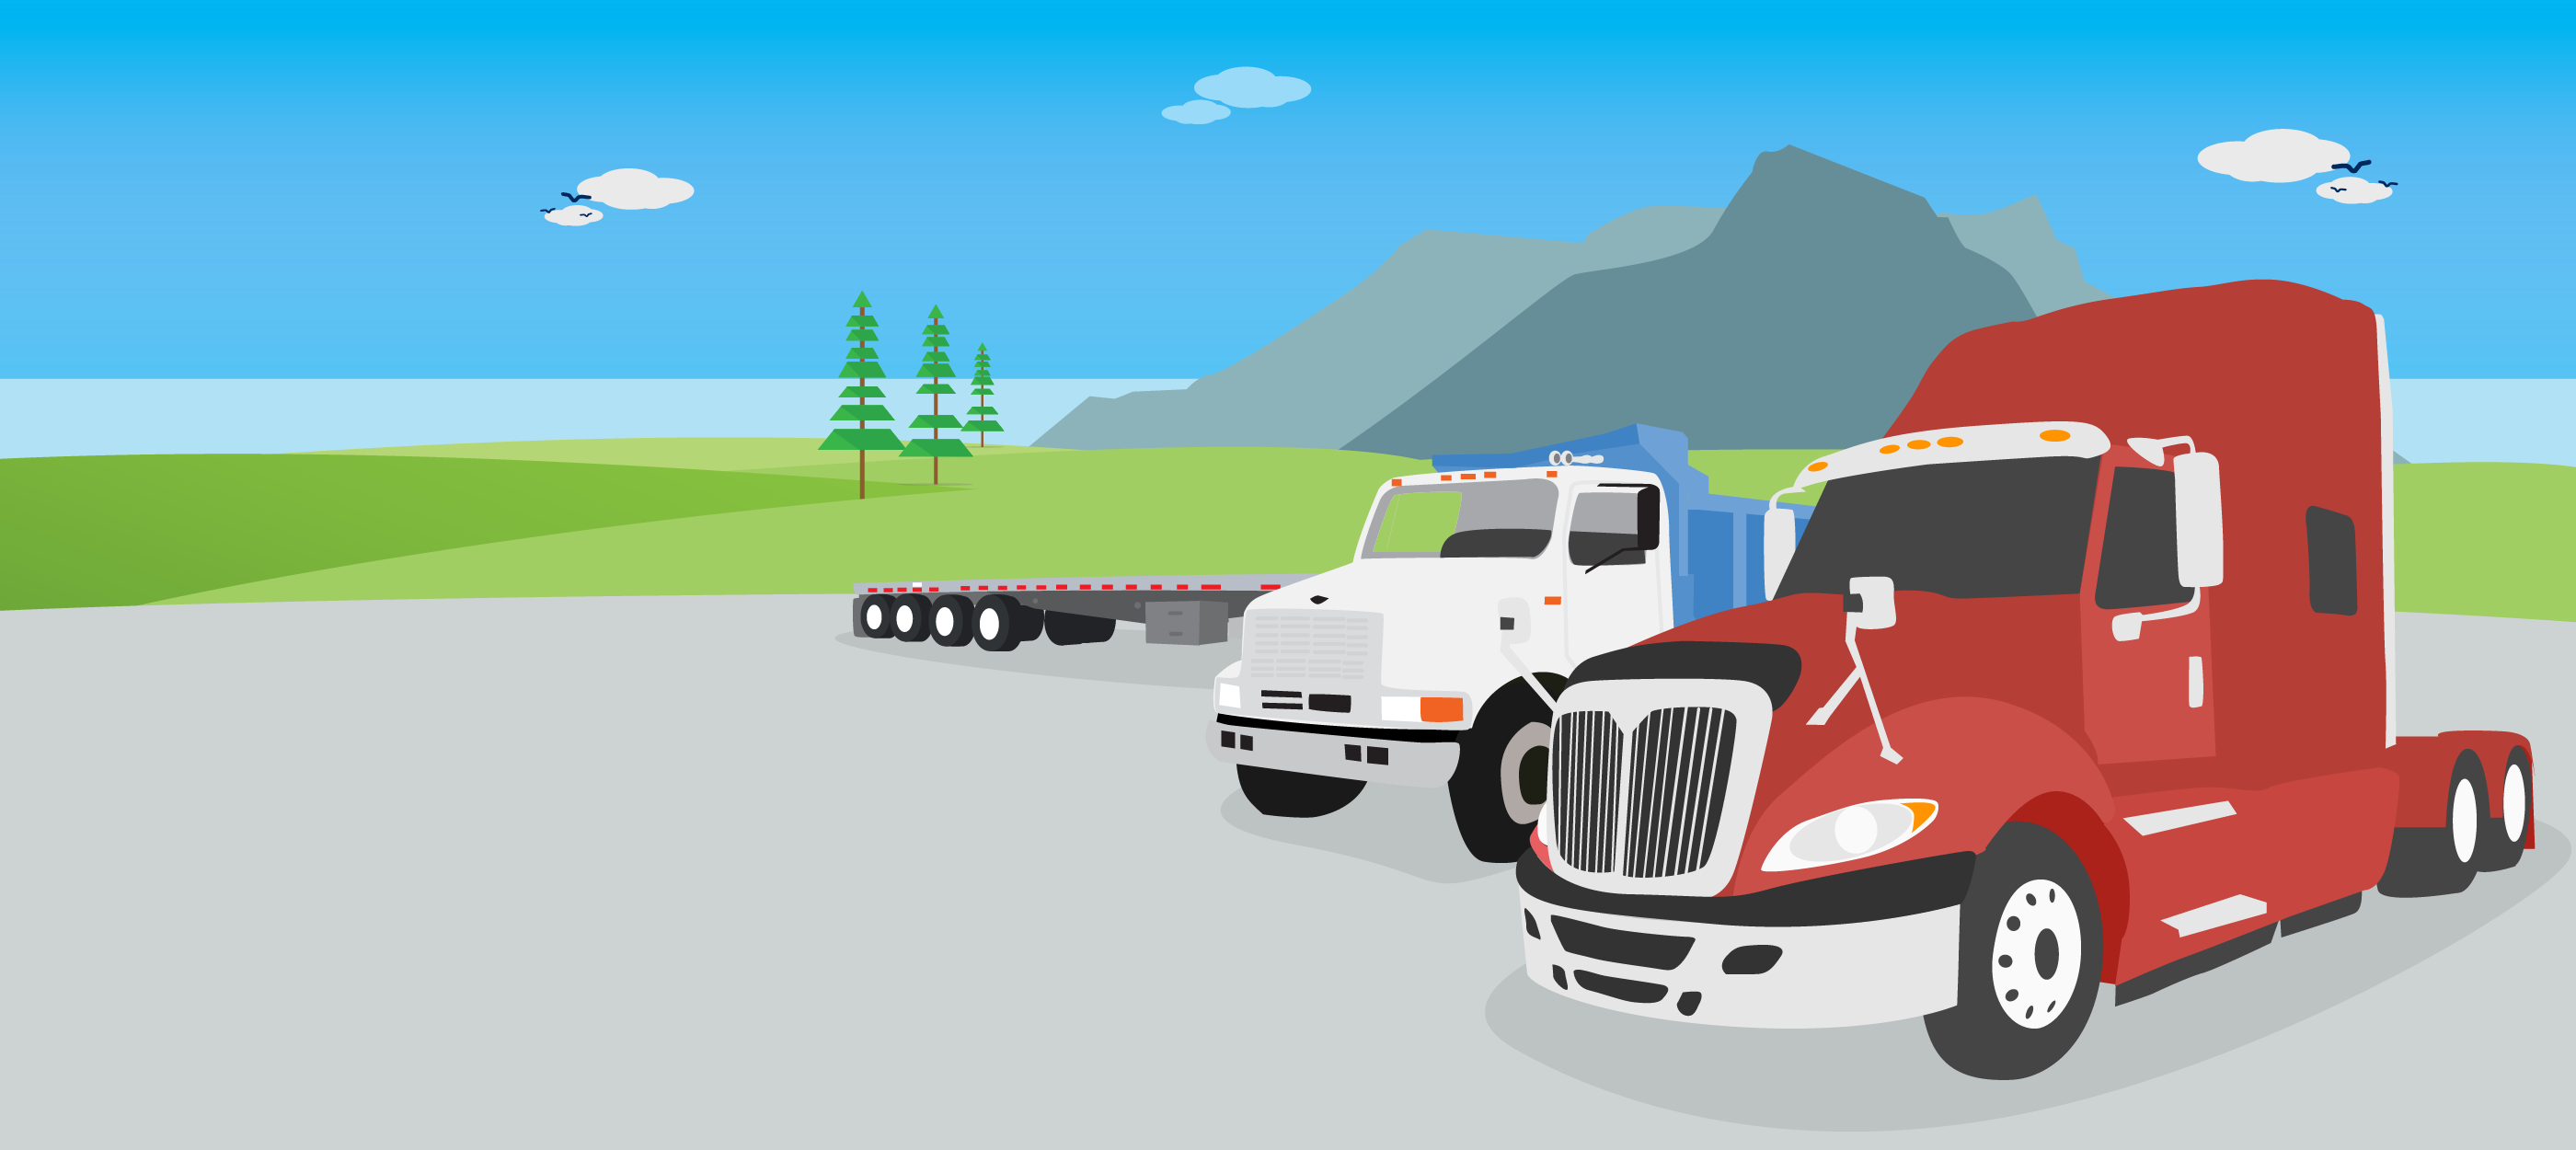 Different types of transportation equipment leasing will help you sell